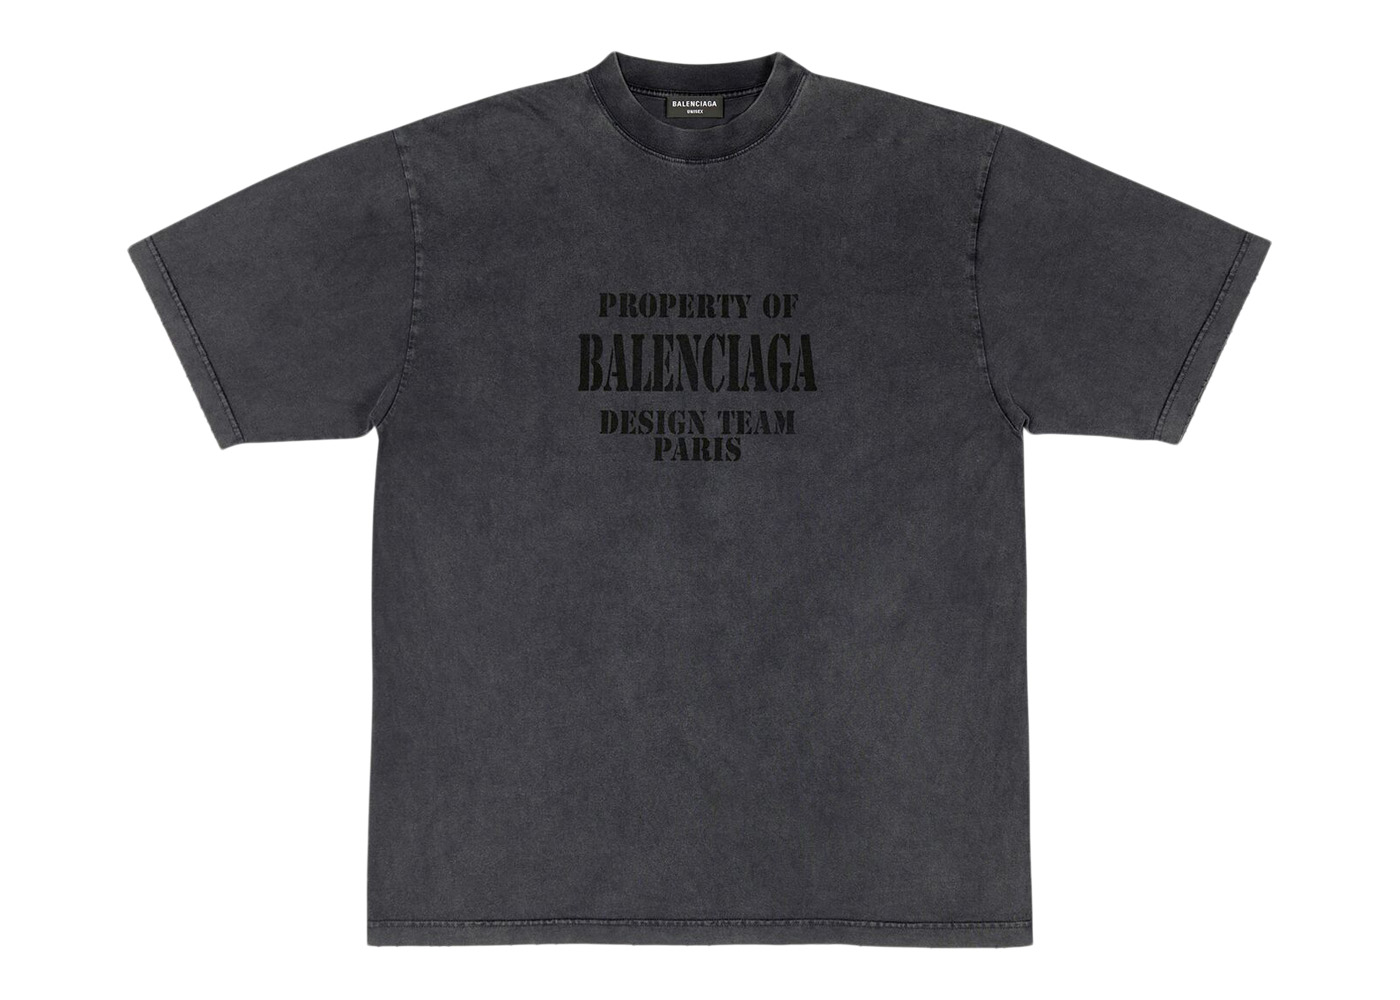 GUCCI X BALENCIAGA TEAM UP IN THE HACKER PROJECT  Shout